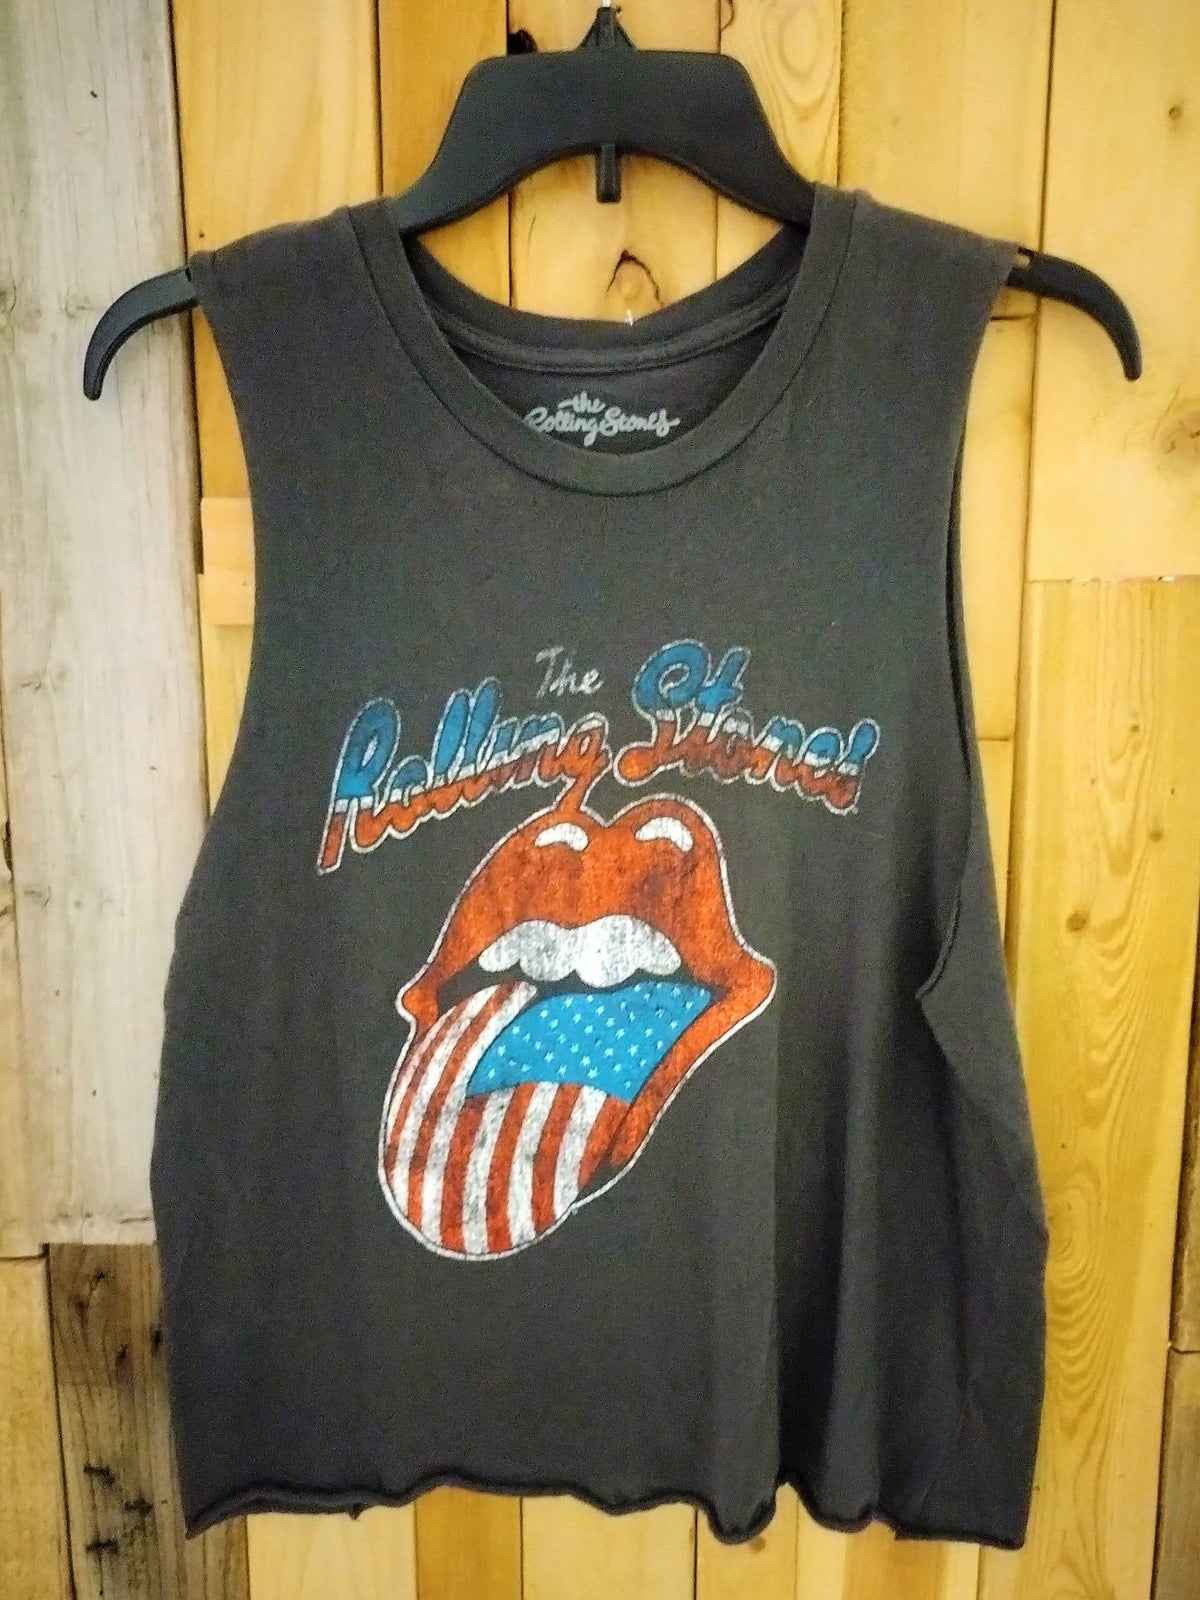 The Rolling Stones T Shirt Size Large Sleeves Cut Off As Is 369471WH